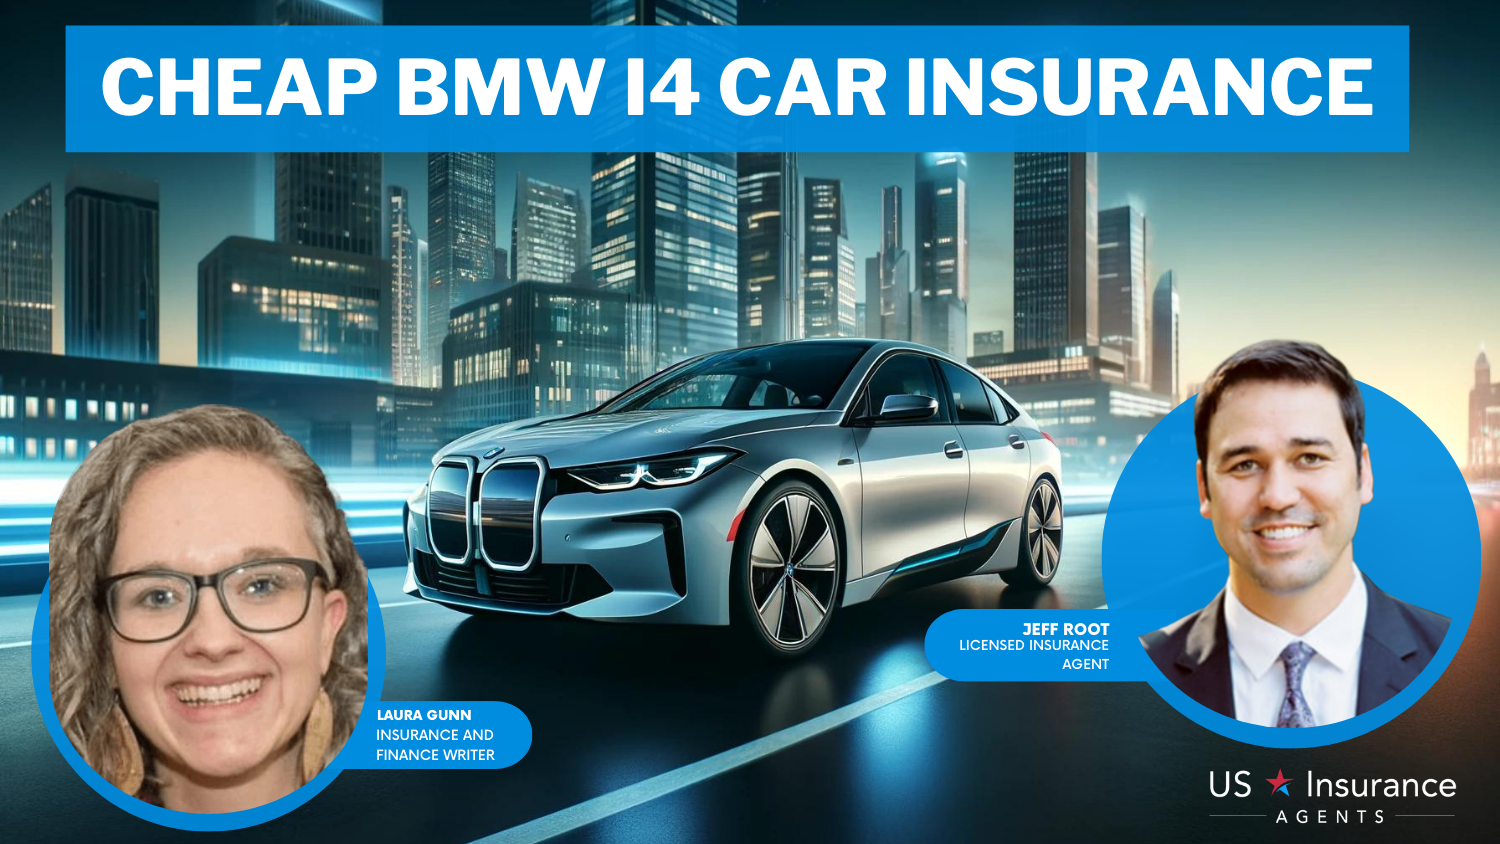 Cheap BMW i4 Car Insurance: USAA, State Farm, and Allstate